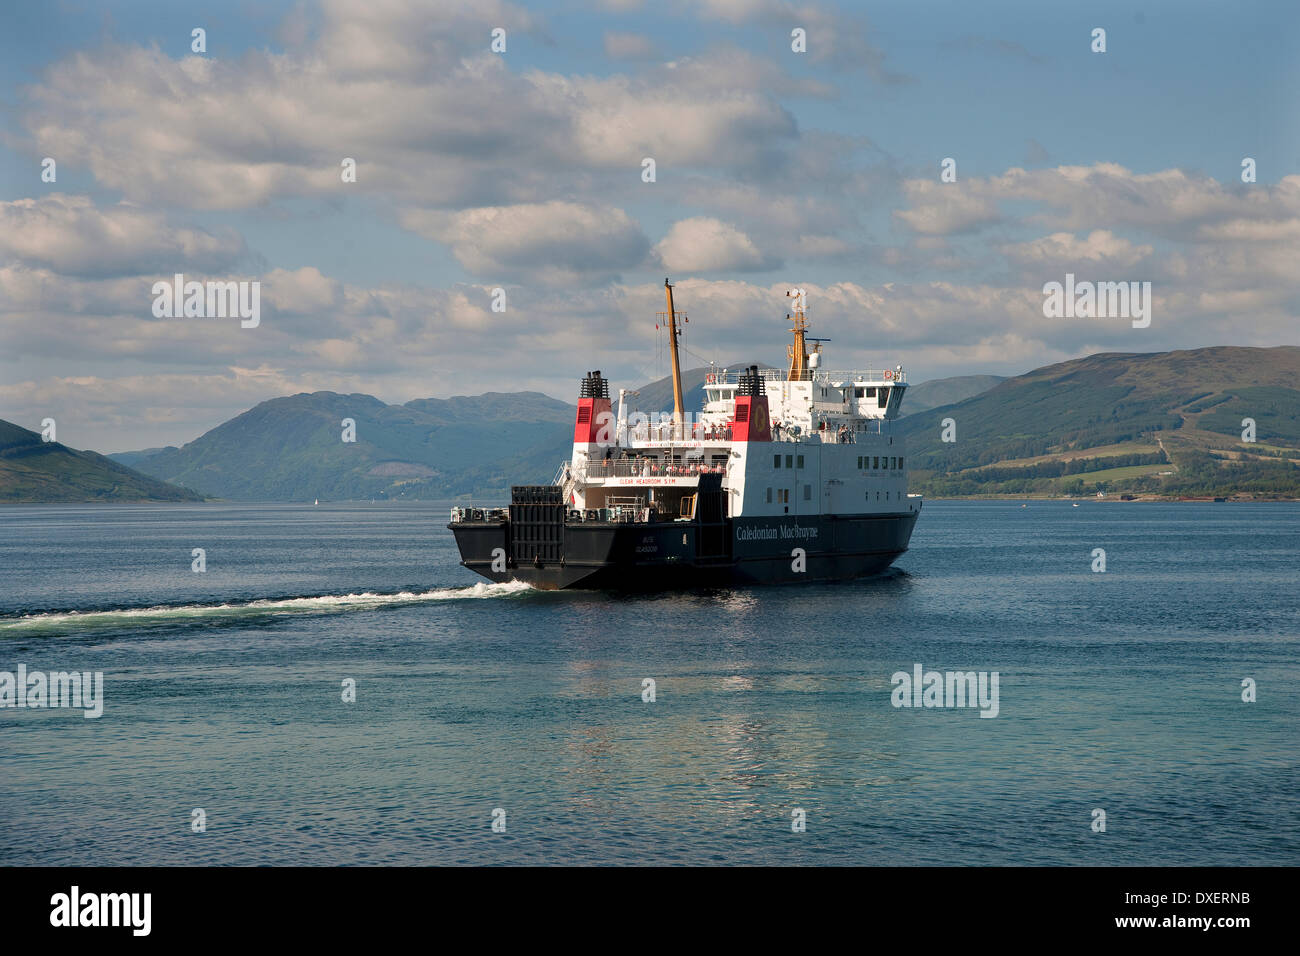 Stern view of the car ferry 'Bute' after departing Rothesay,on the island of Bute,Argyll, Stock Photo